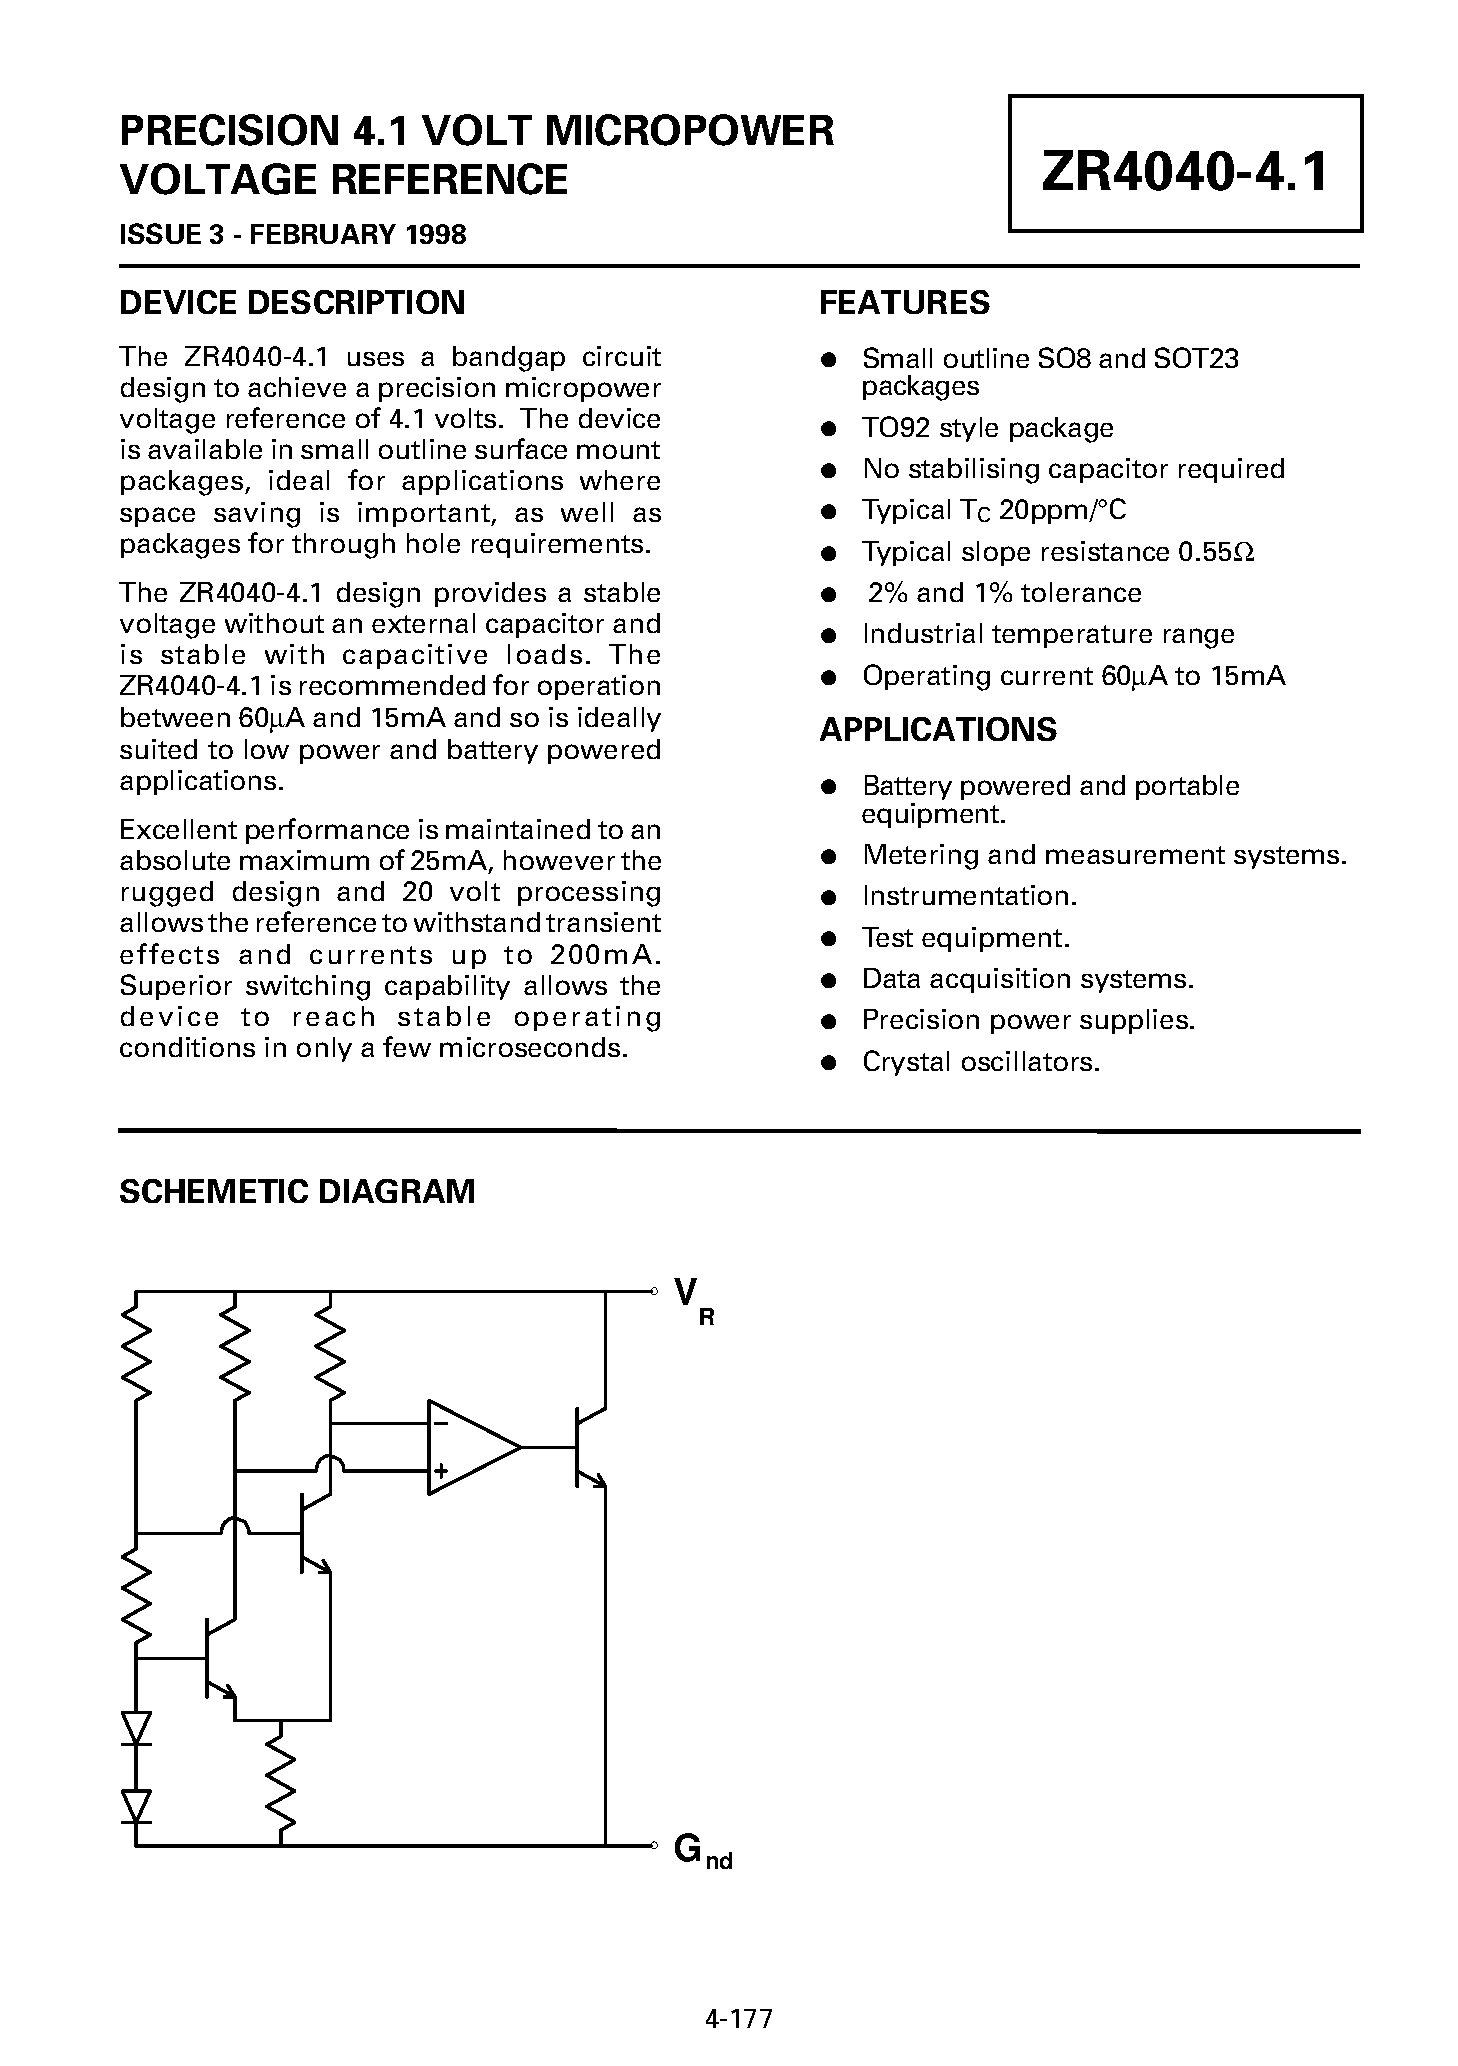 Datasheet ZR40401R41 - PRECISION 4.1 VOLT MICROPOWER VOLTAGE REFERENCE page 1